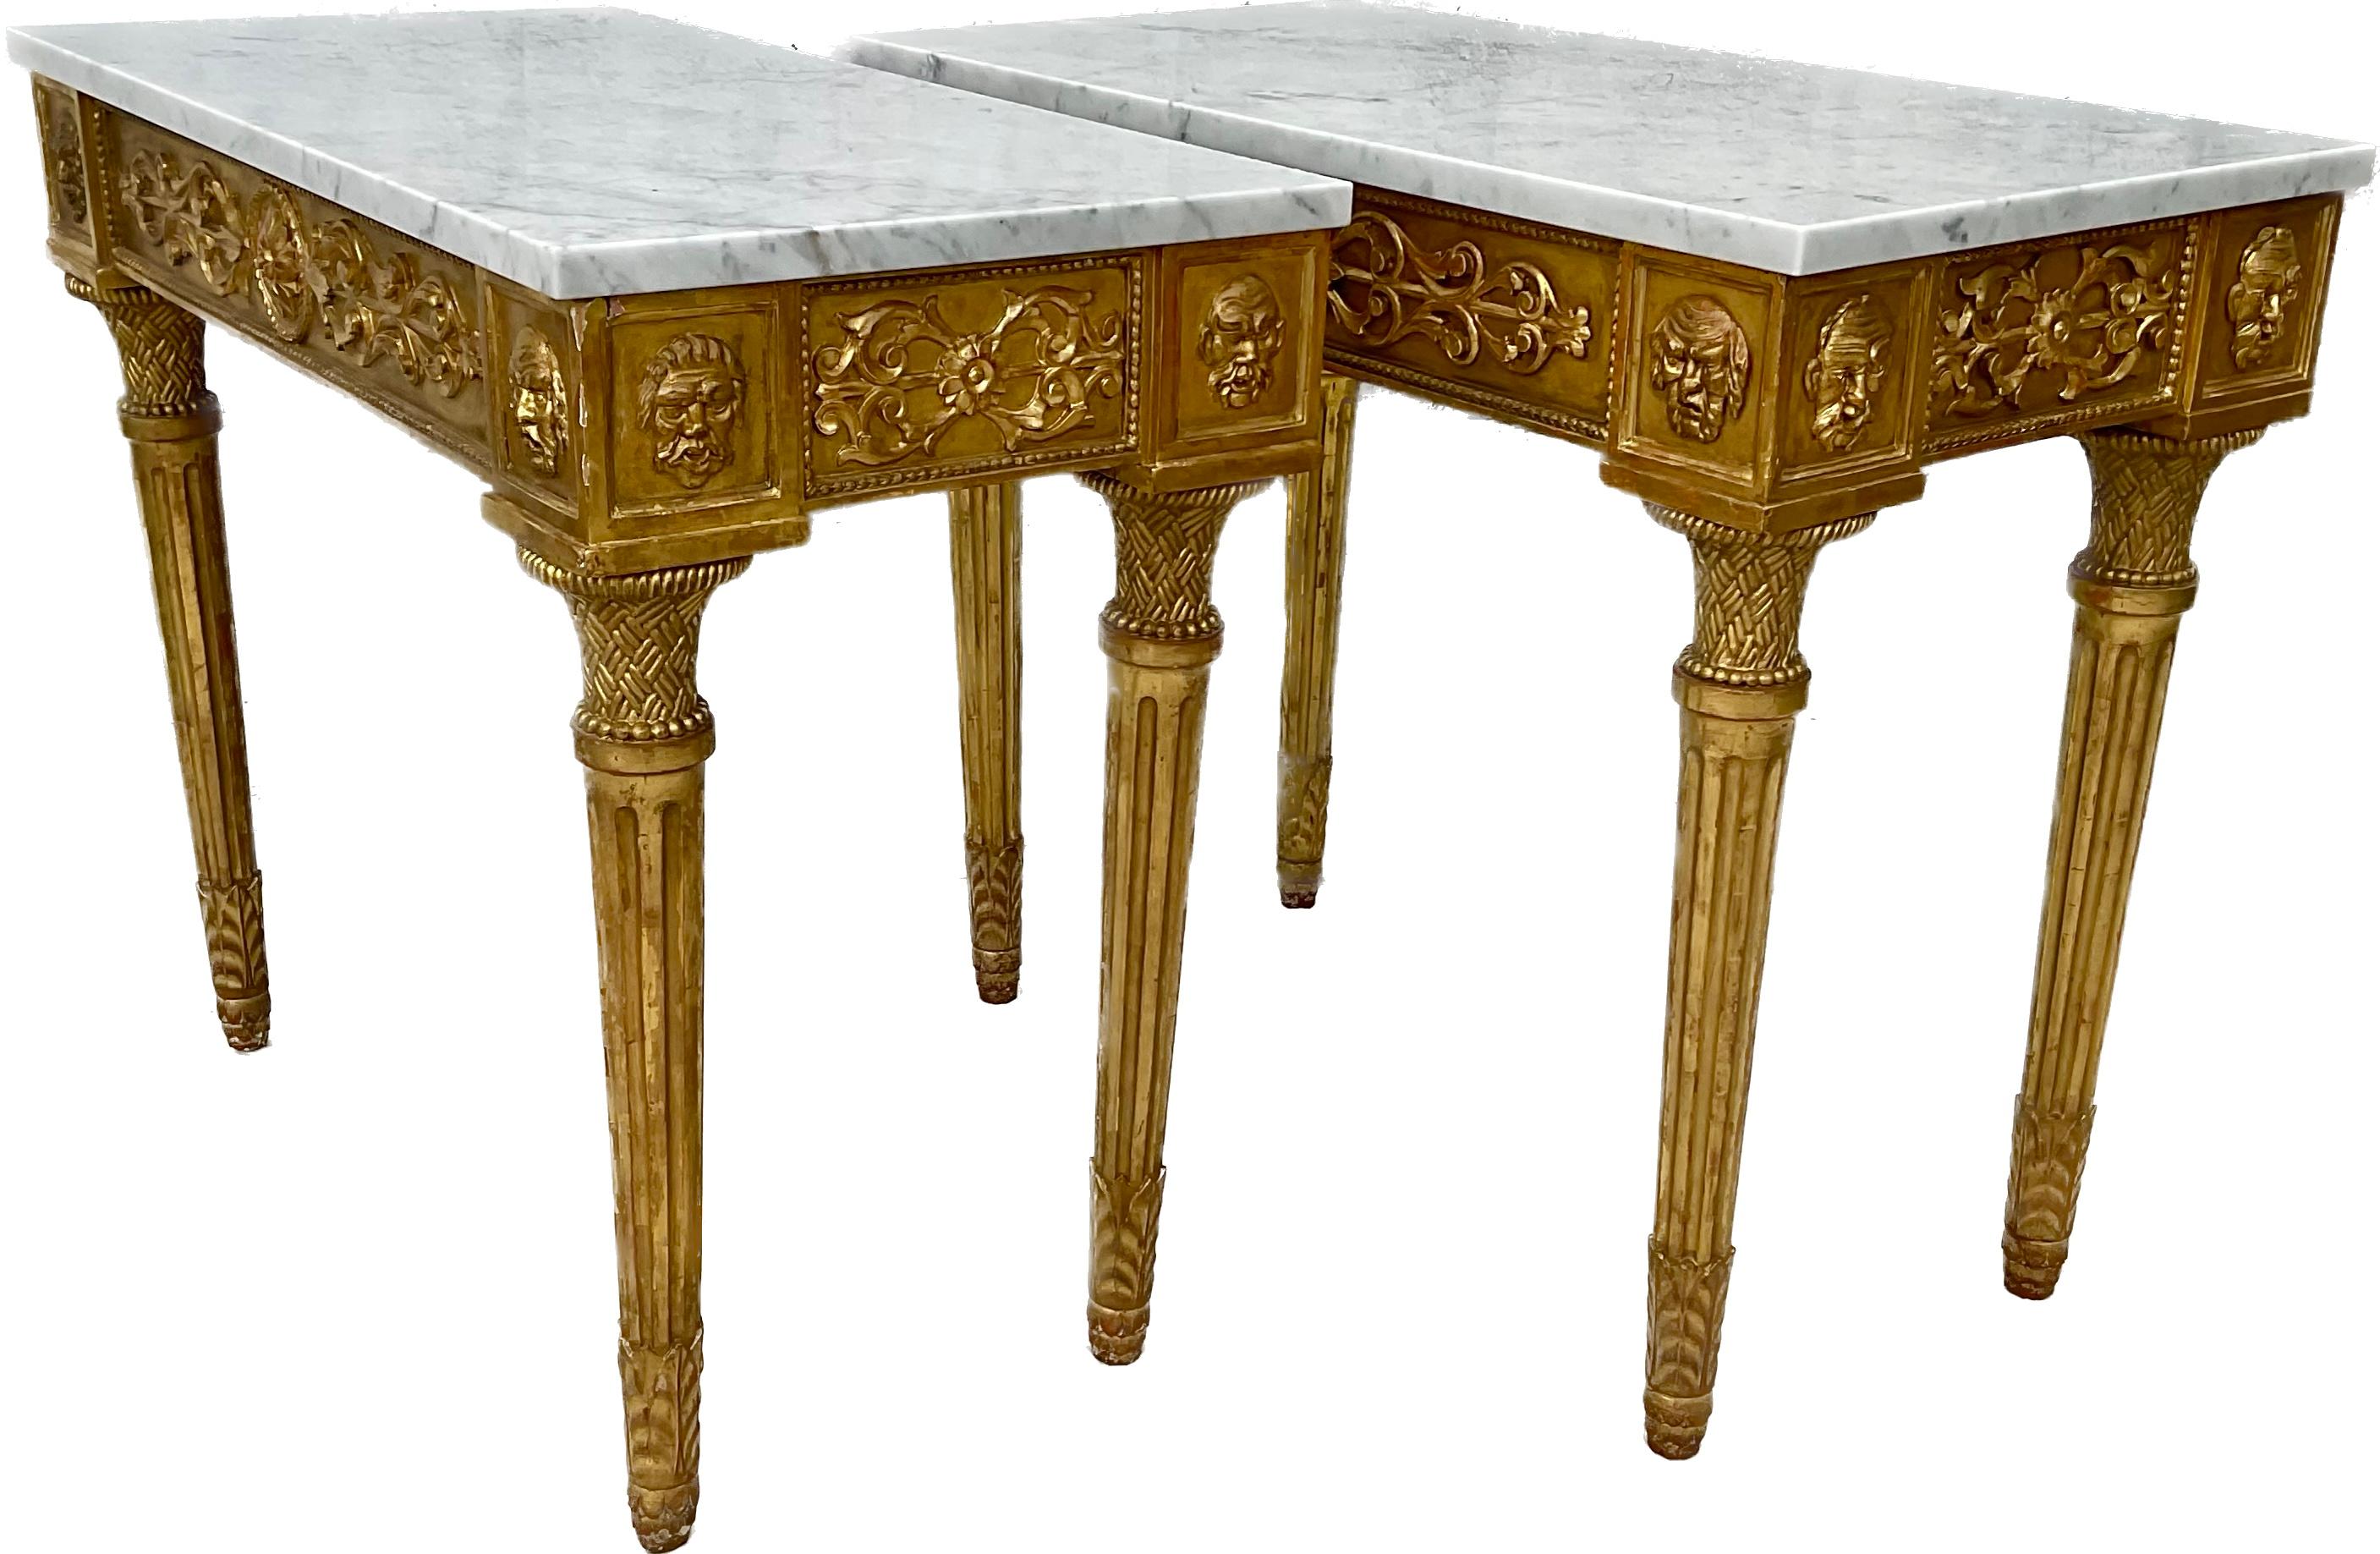 Pair Of 19th Century Italian Neoclassical Giltwood Console table With Marble Top In Good Condition For Sale In Bradenton, FL